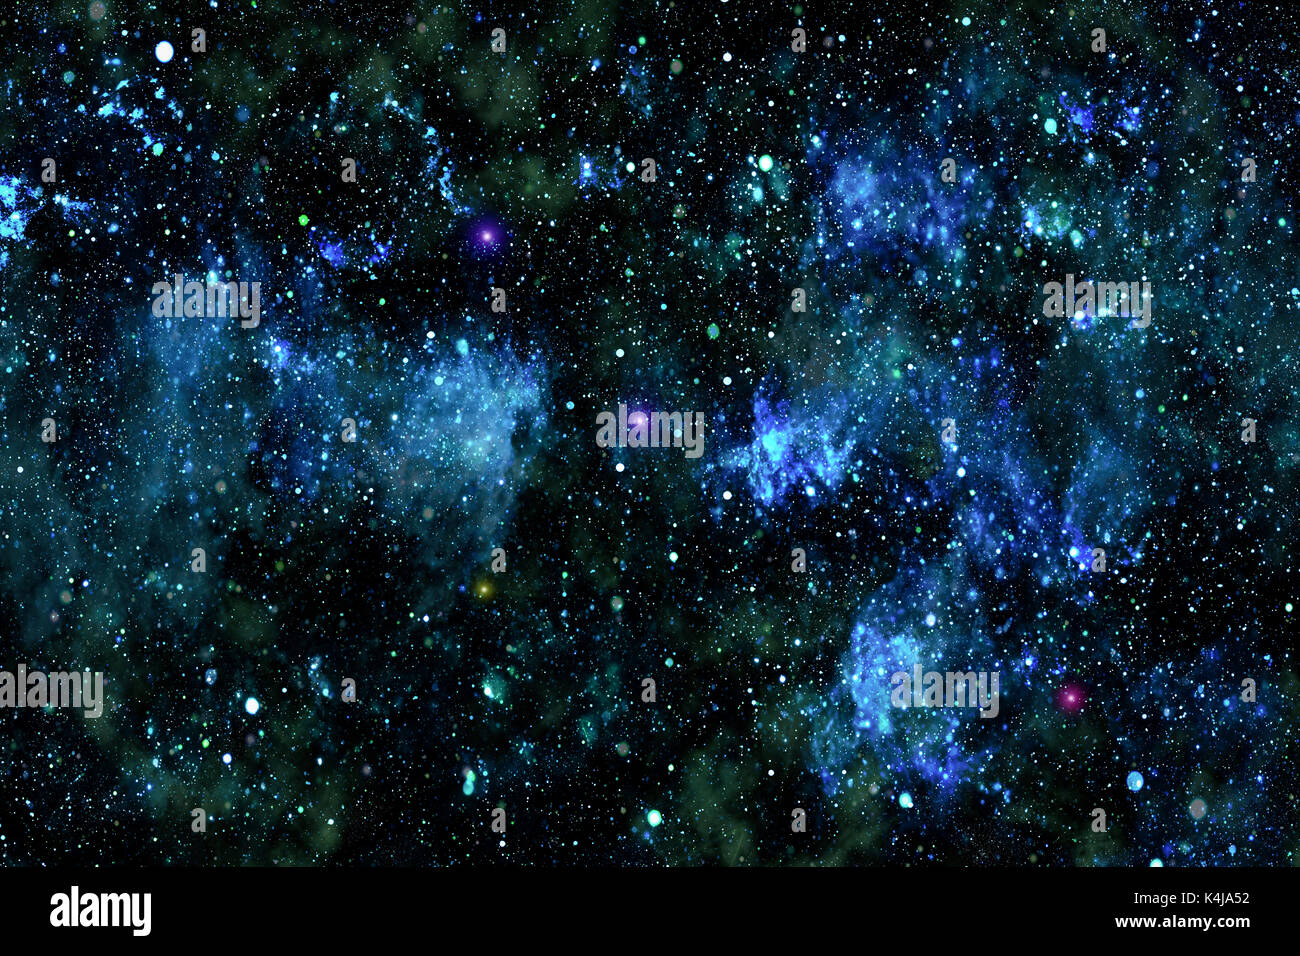 Colorful Starry Night Sky Outer Space background Stock Photo